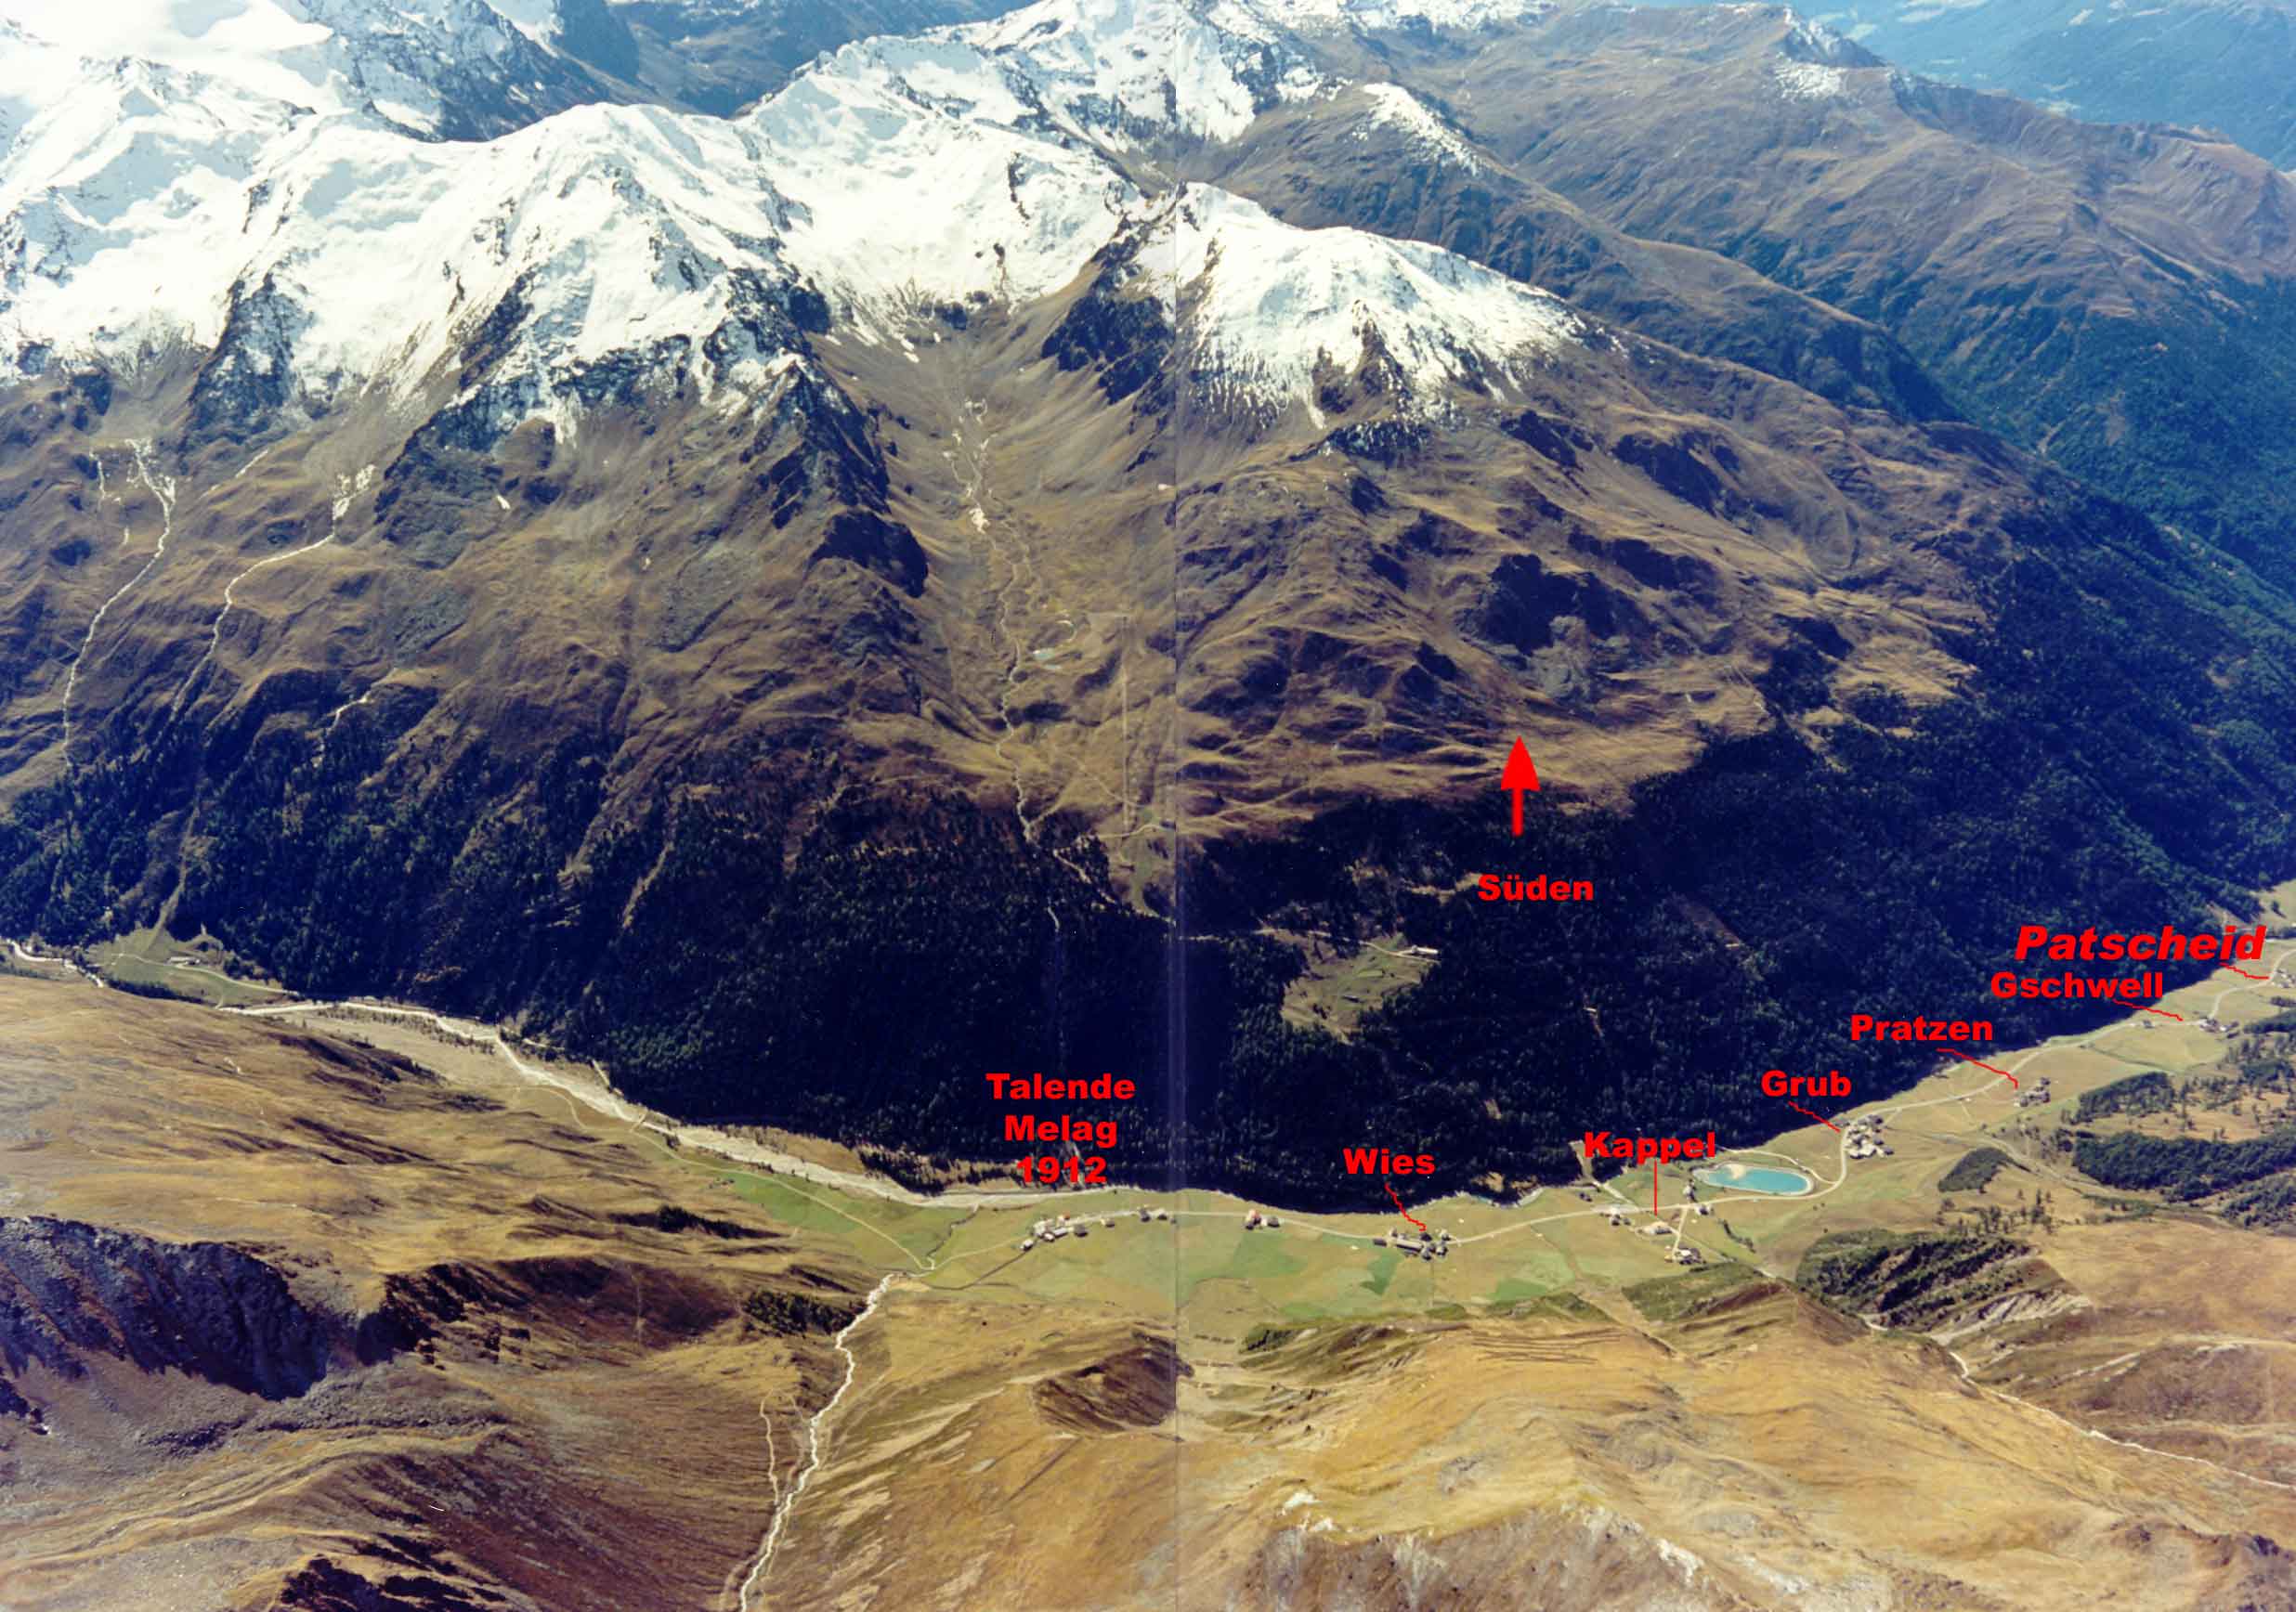 Aerial view of the Lantaufer valley with the location of the individual farms: Melag, Wies, Kappl, Grub, Pratzen, Gschwell and Patscheid.